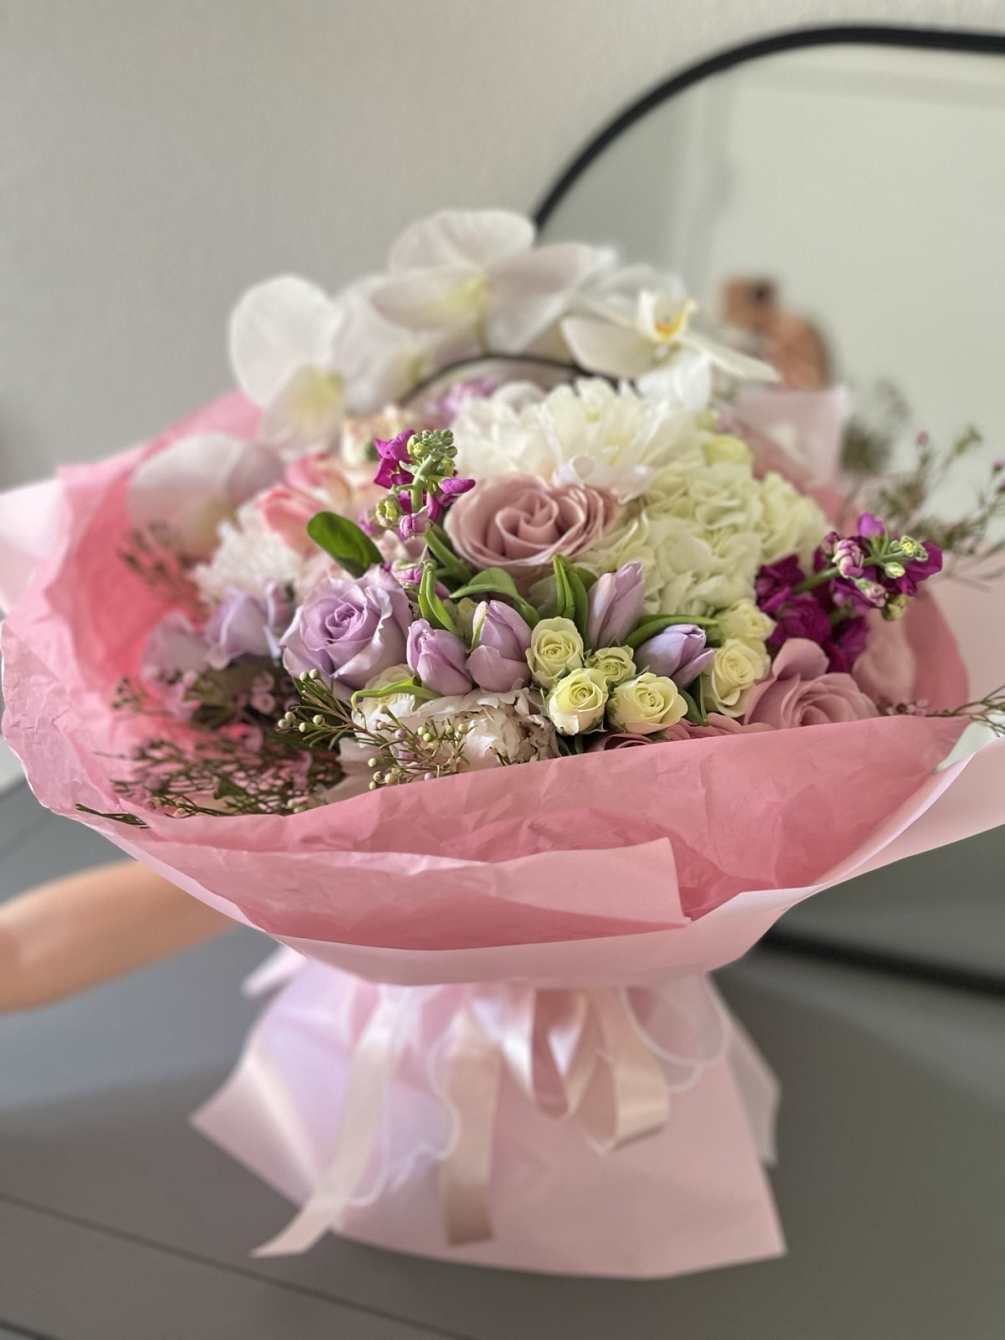 Description: This delightful bouquet is for a special occasion: birthday, anniversary, proposals